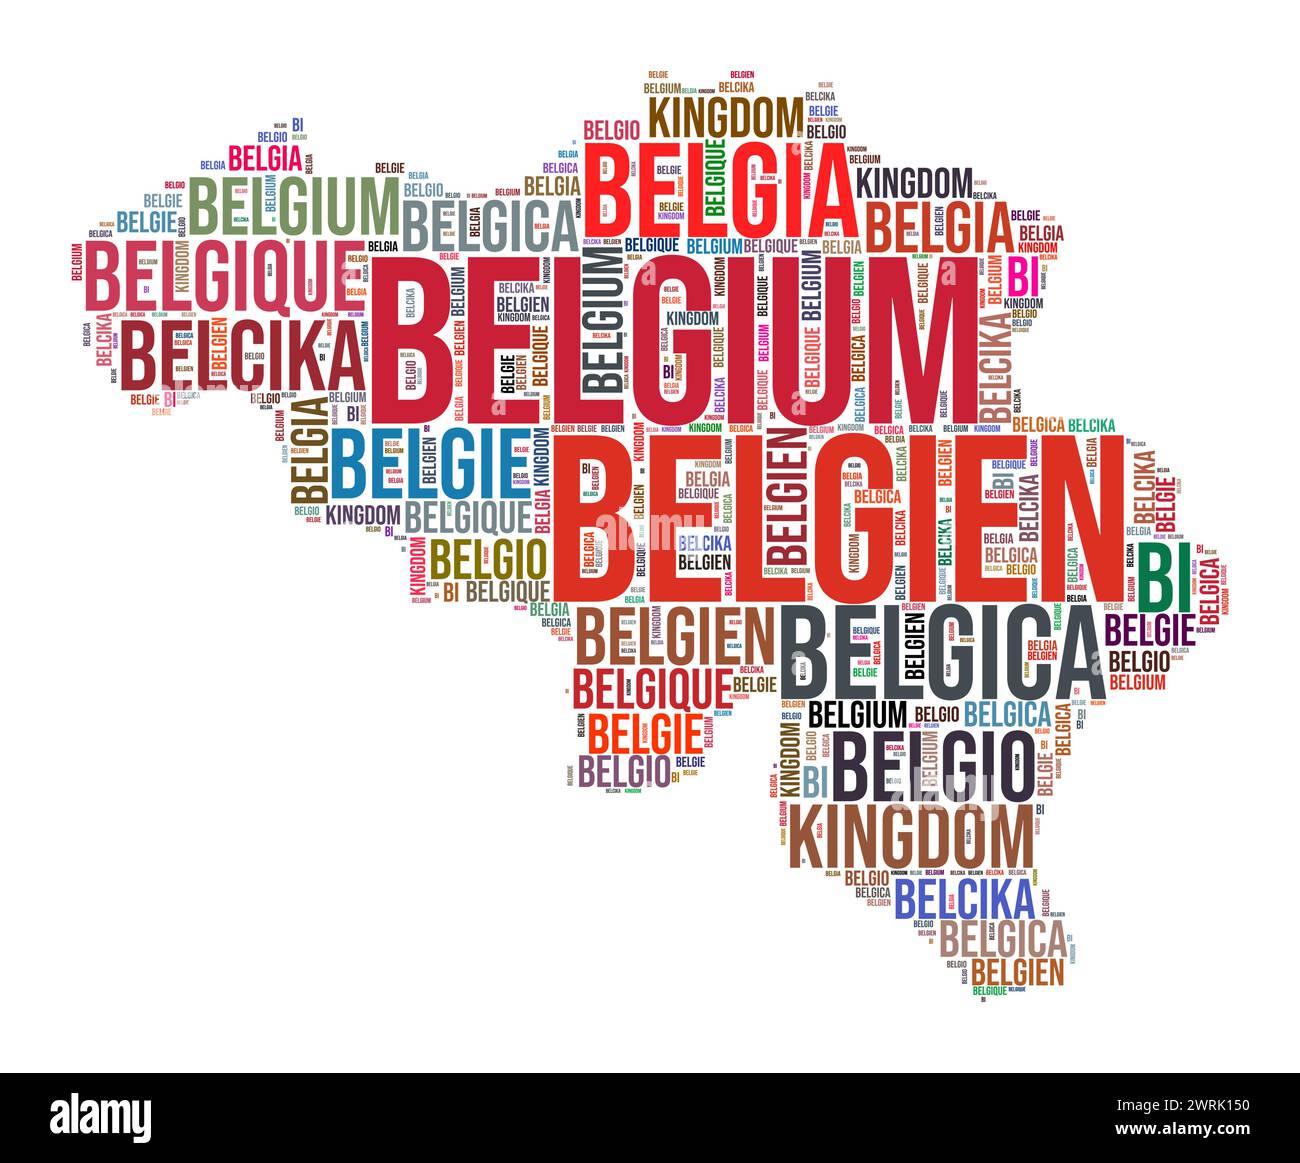 Belgium country shape word cloud. Typography style country illustration. Belgium image in text cloud style. Vector illustration. Stock Vector